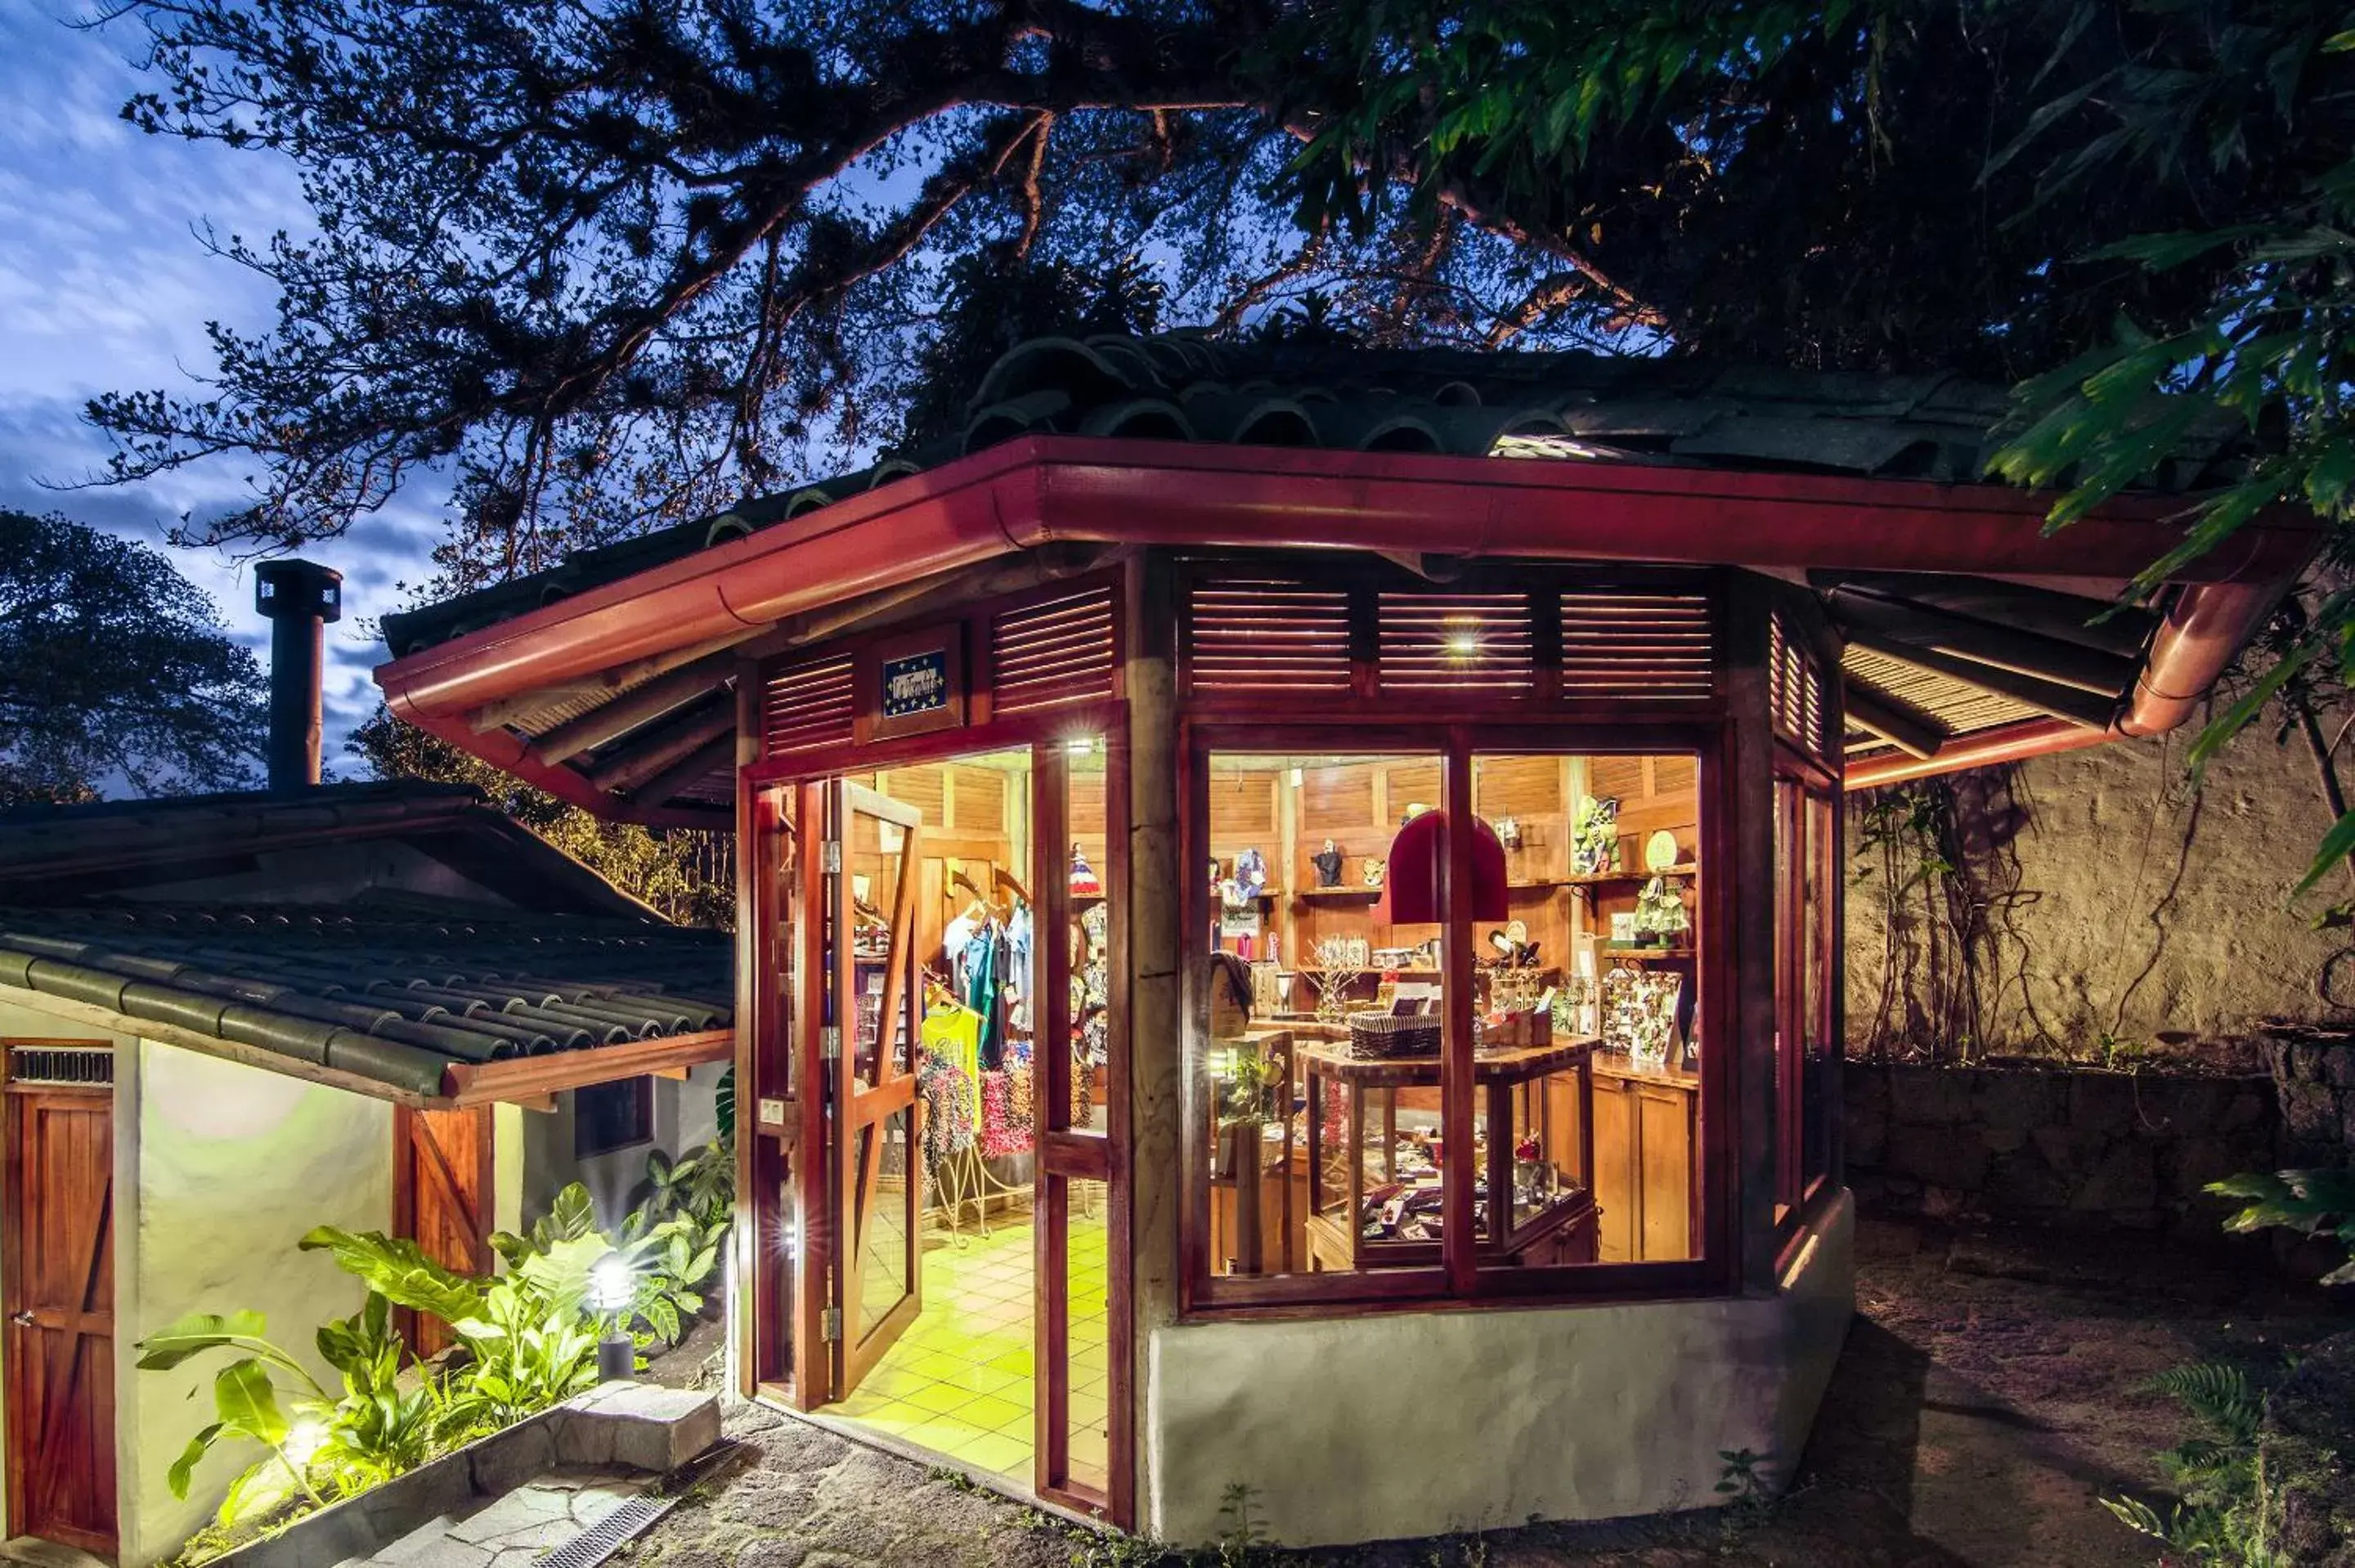 On-site shops, Property Building in Finca Rosa Blanca Coffee Farm and Inn